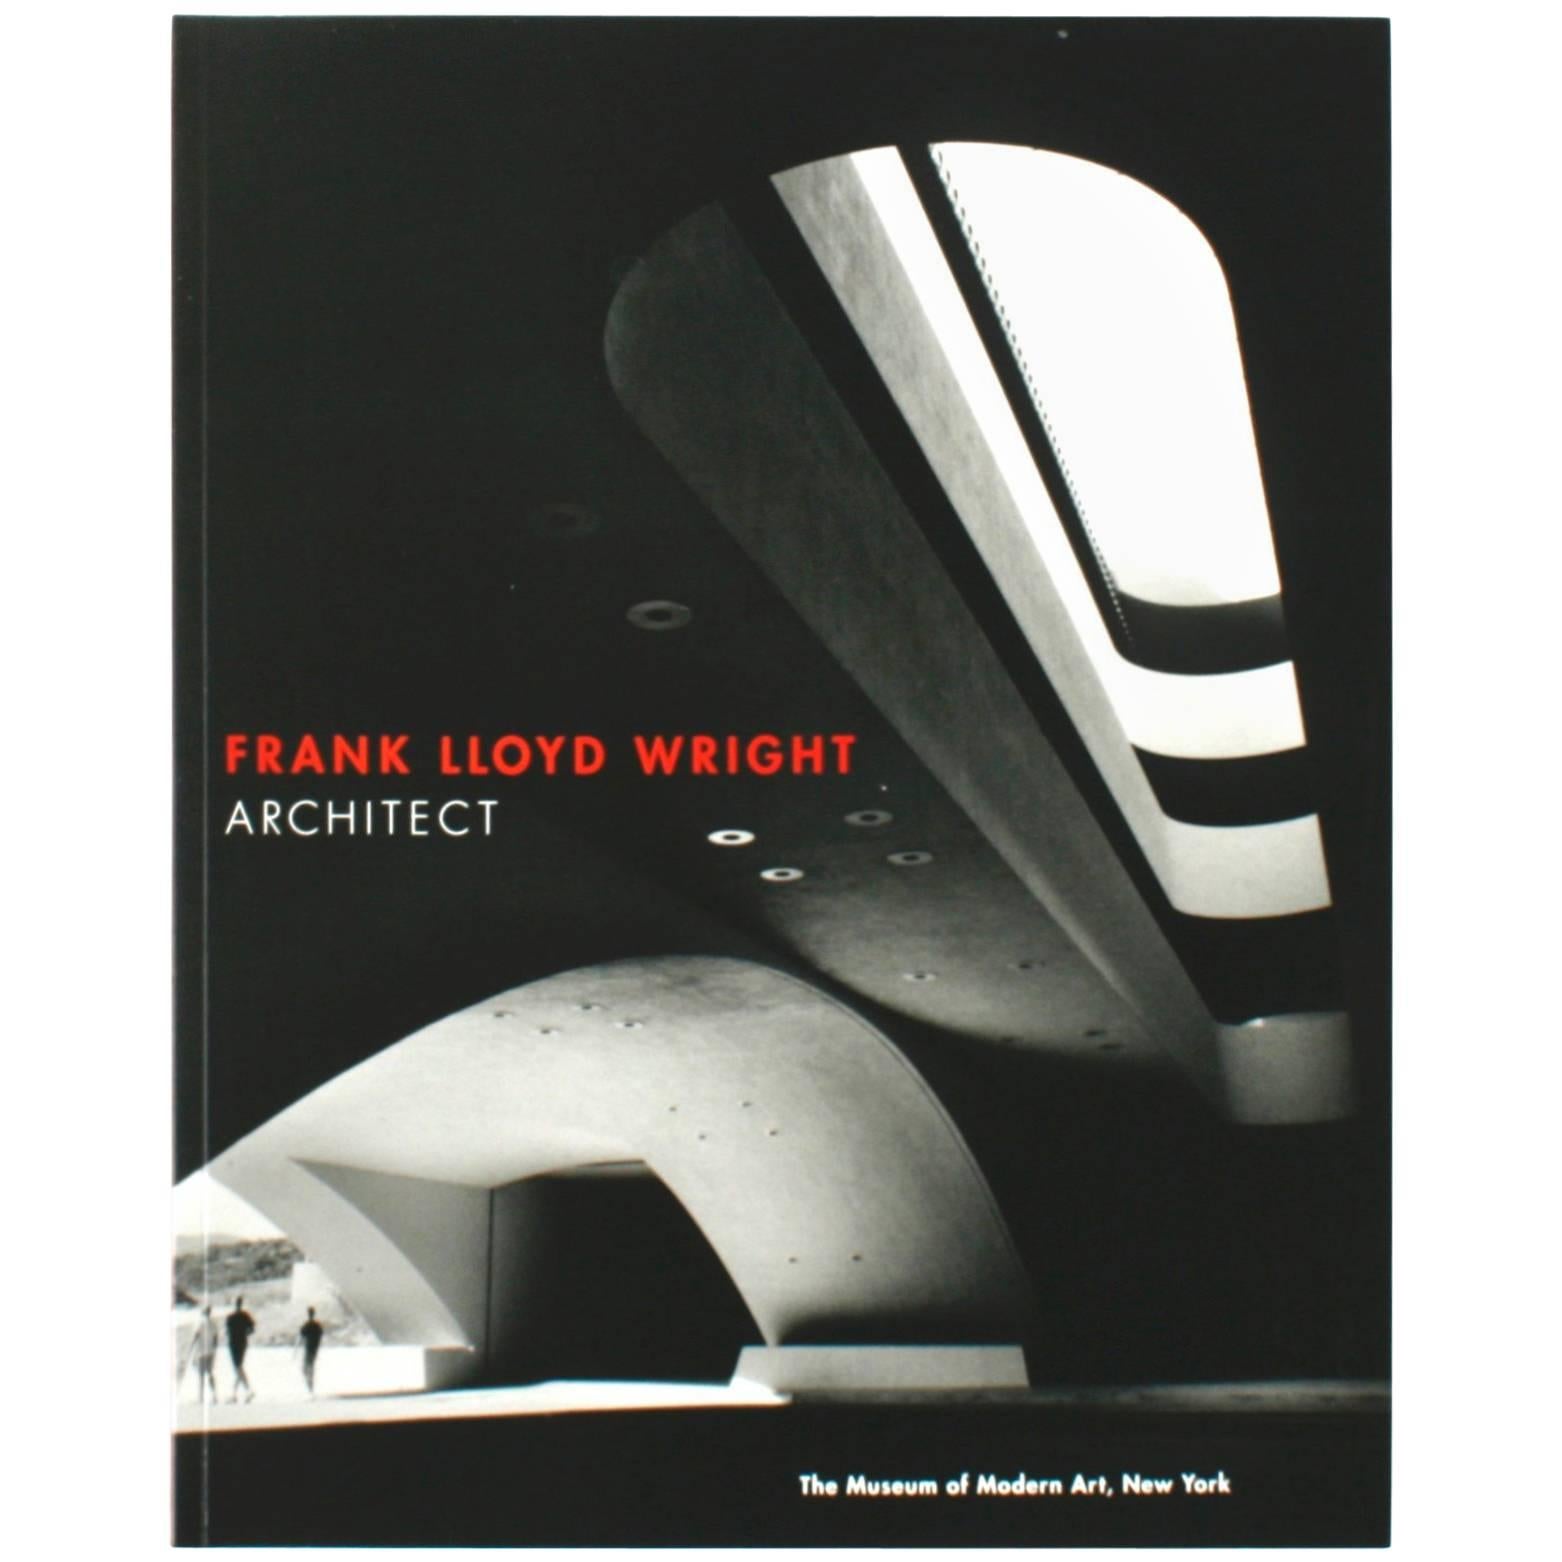 Frank Lloyd Wright: Architect Edited by Terence Riley, First Edition